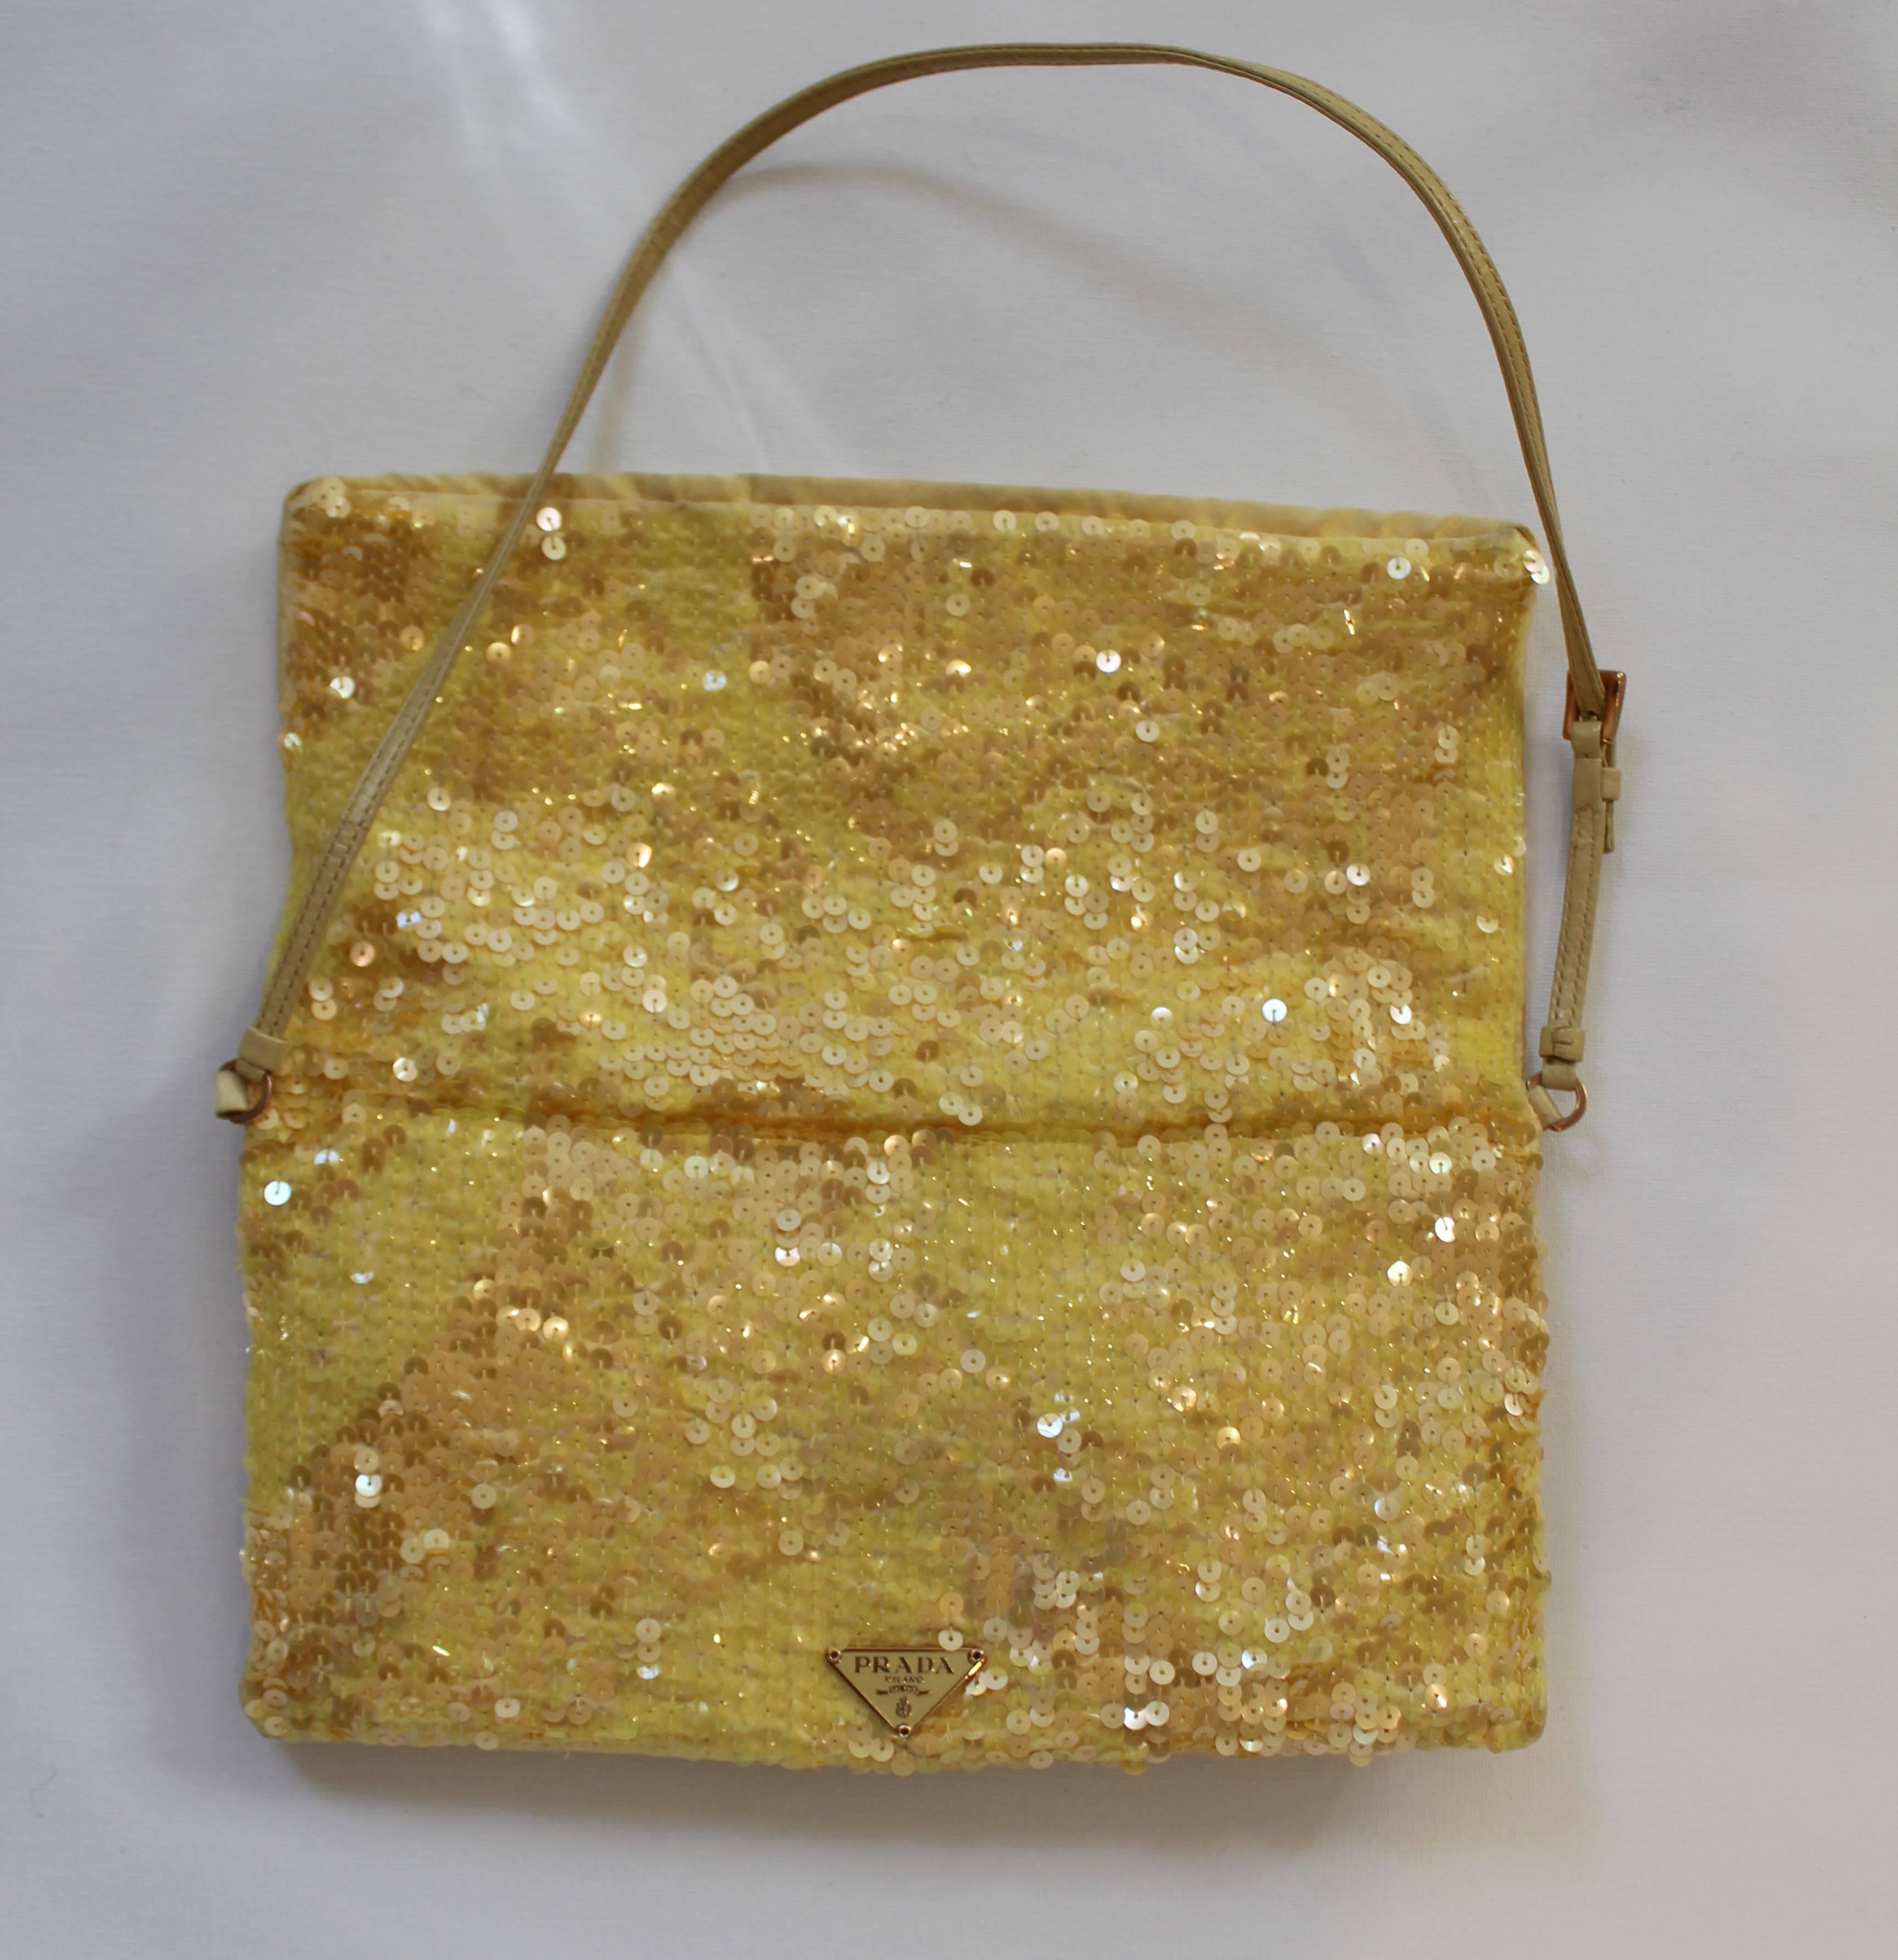 This darling Prada rectangular fold over handbag with satin lining makes quite the fashion statement.  The sunny yellow sequins are both clear and iridescent in nature.  The shoulder strap is made of yellow leather.  Bag features one interior zipped